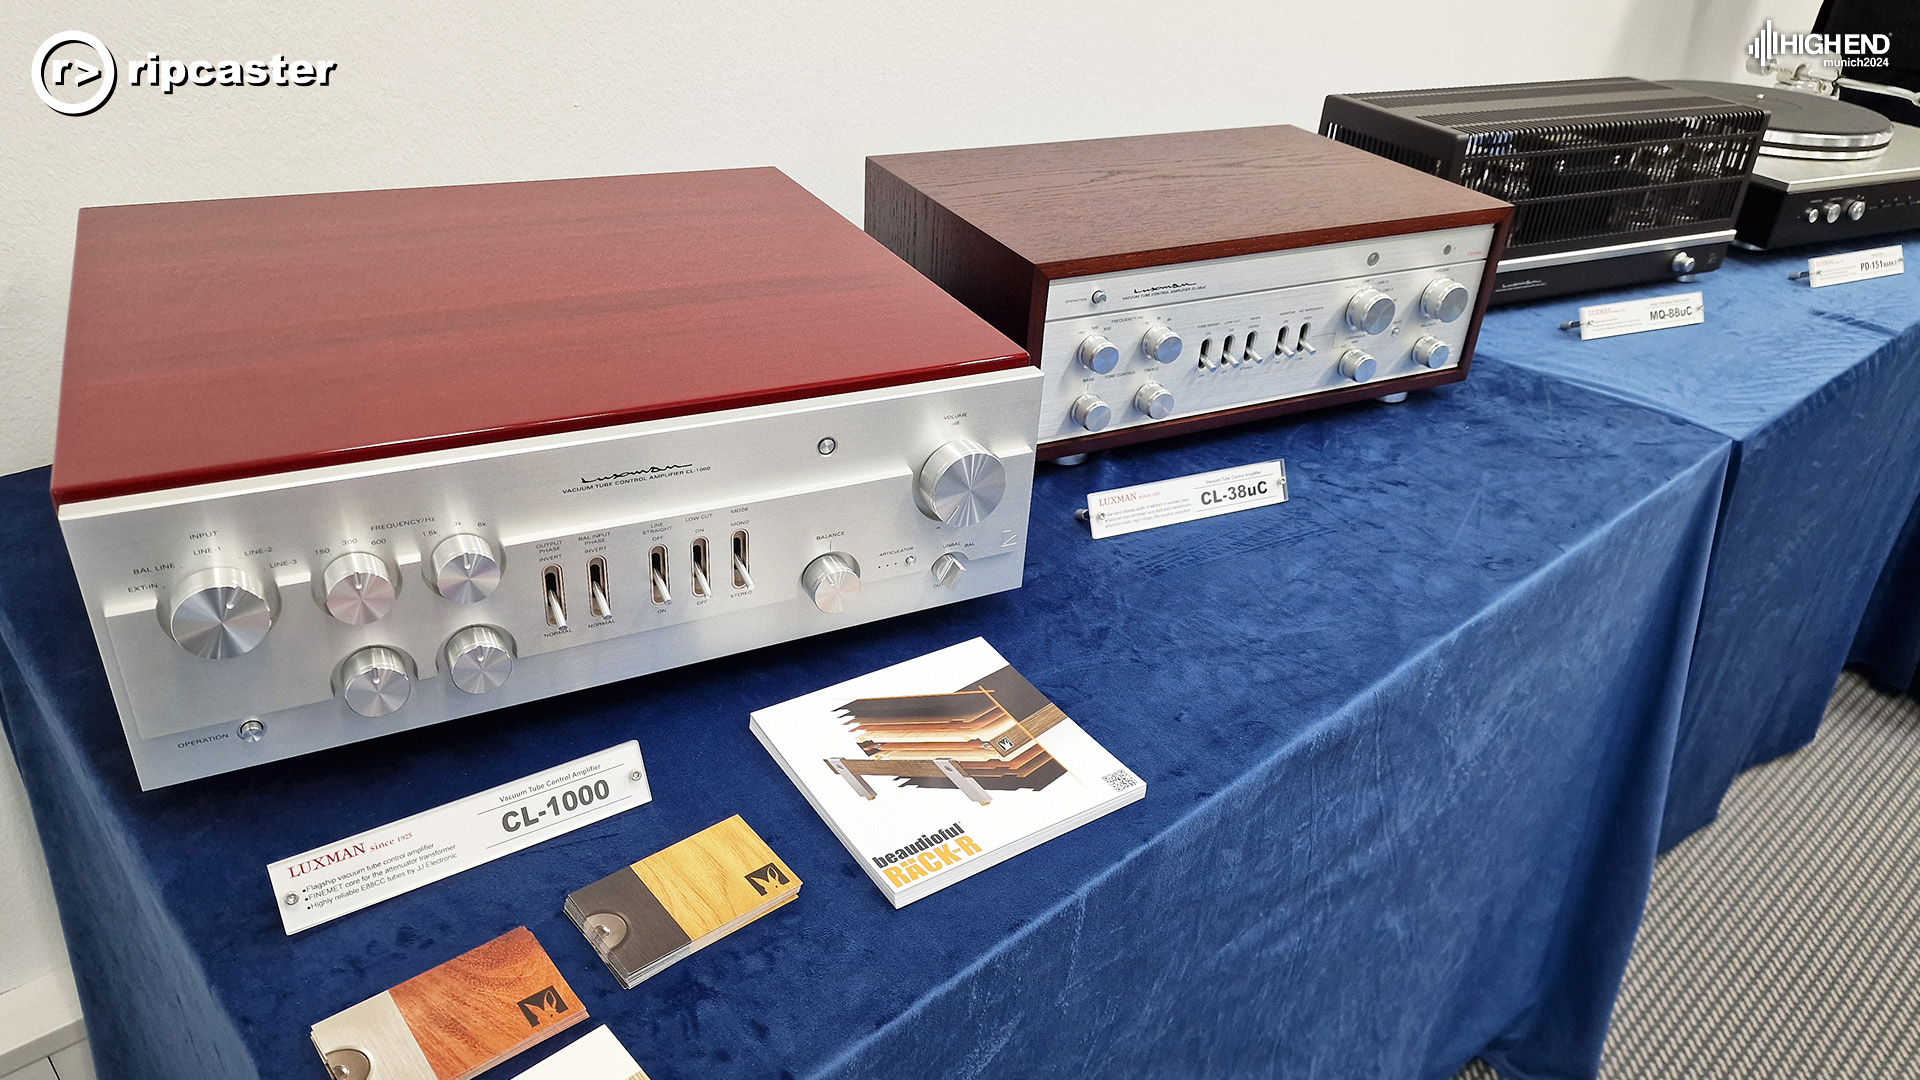 Luxman.  HiFi equipment lined up along a table with blue velvet draped over the table